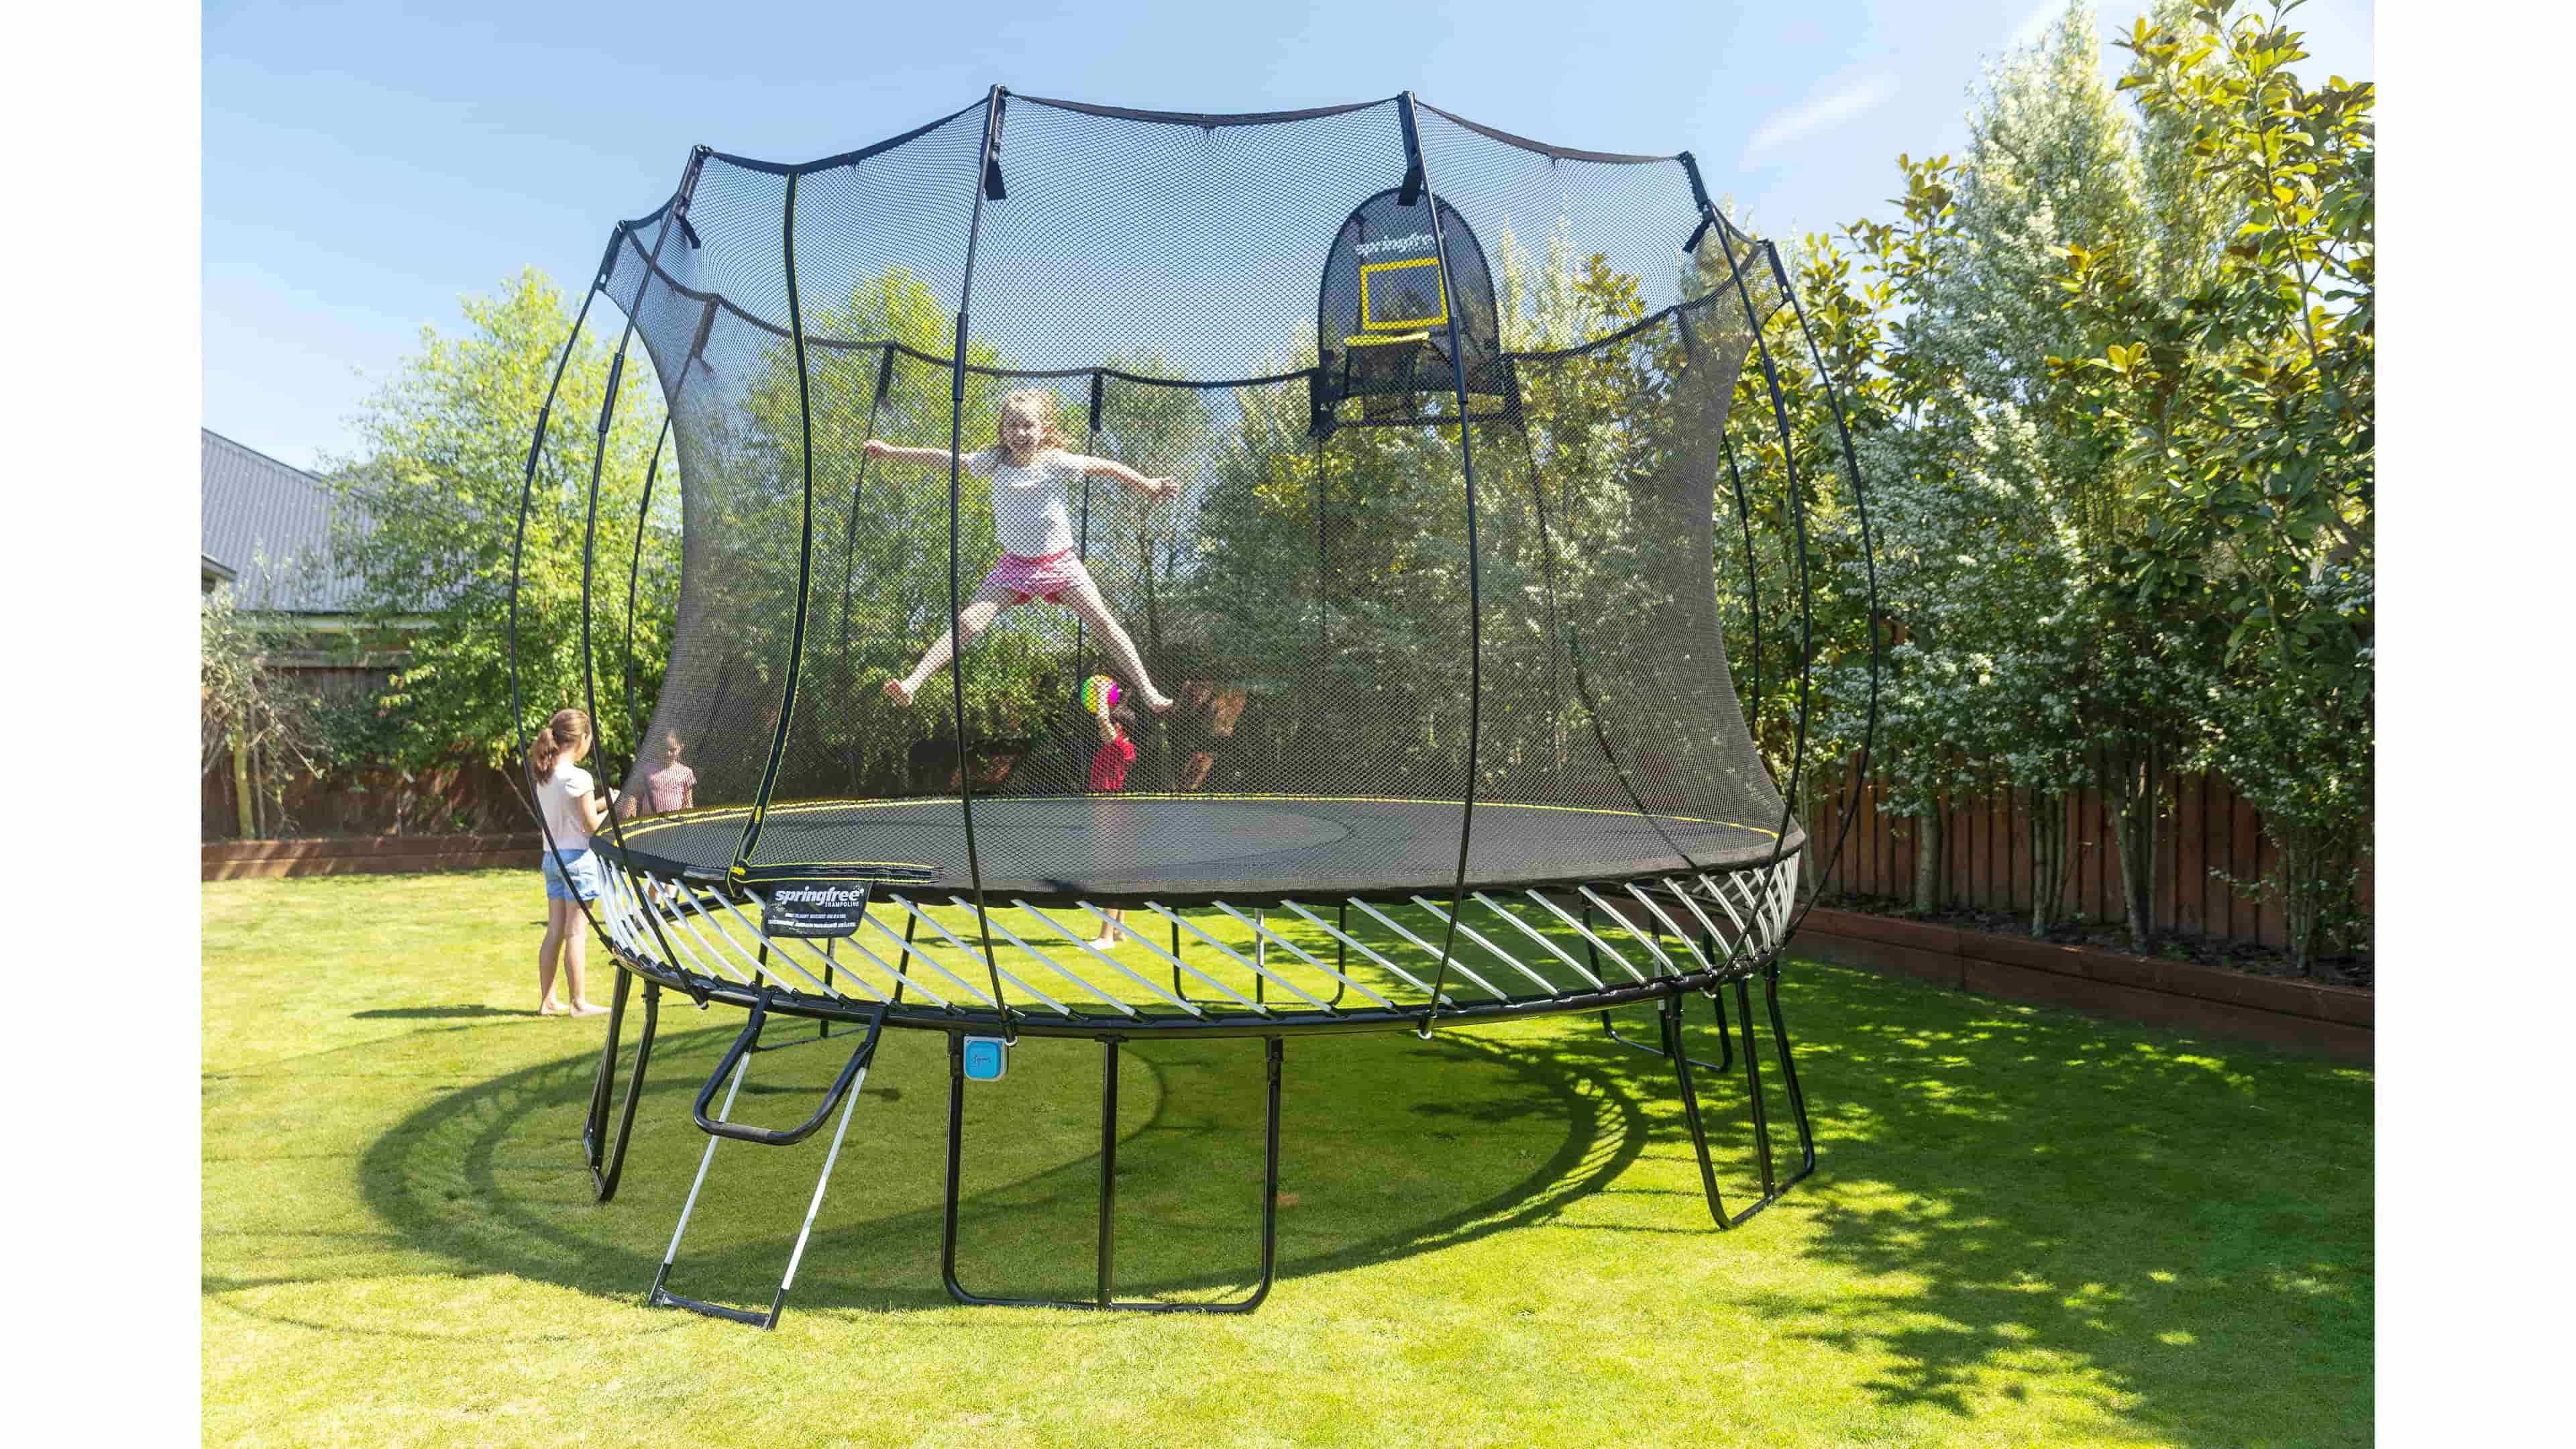 The Truth About Trampoline Sizes (It’s Not What You Think)